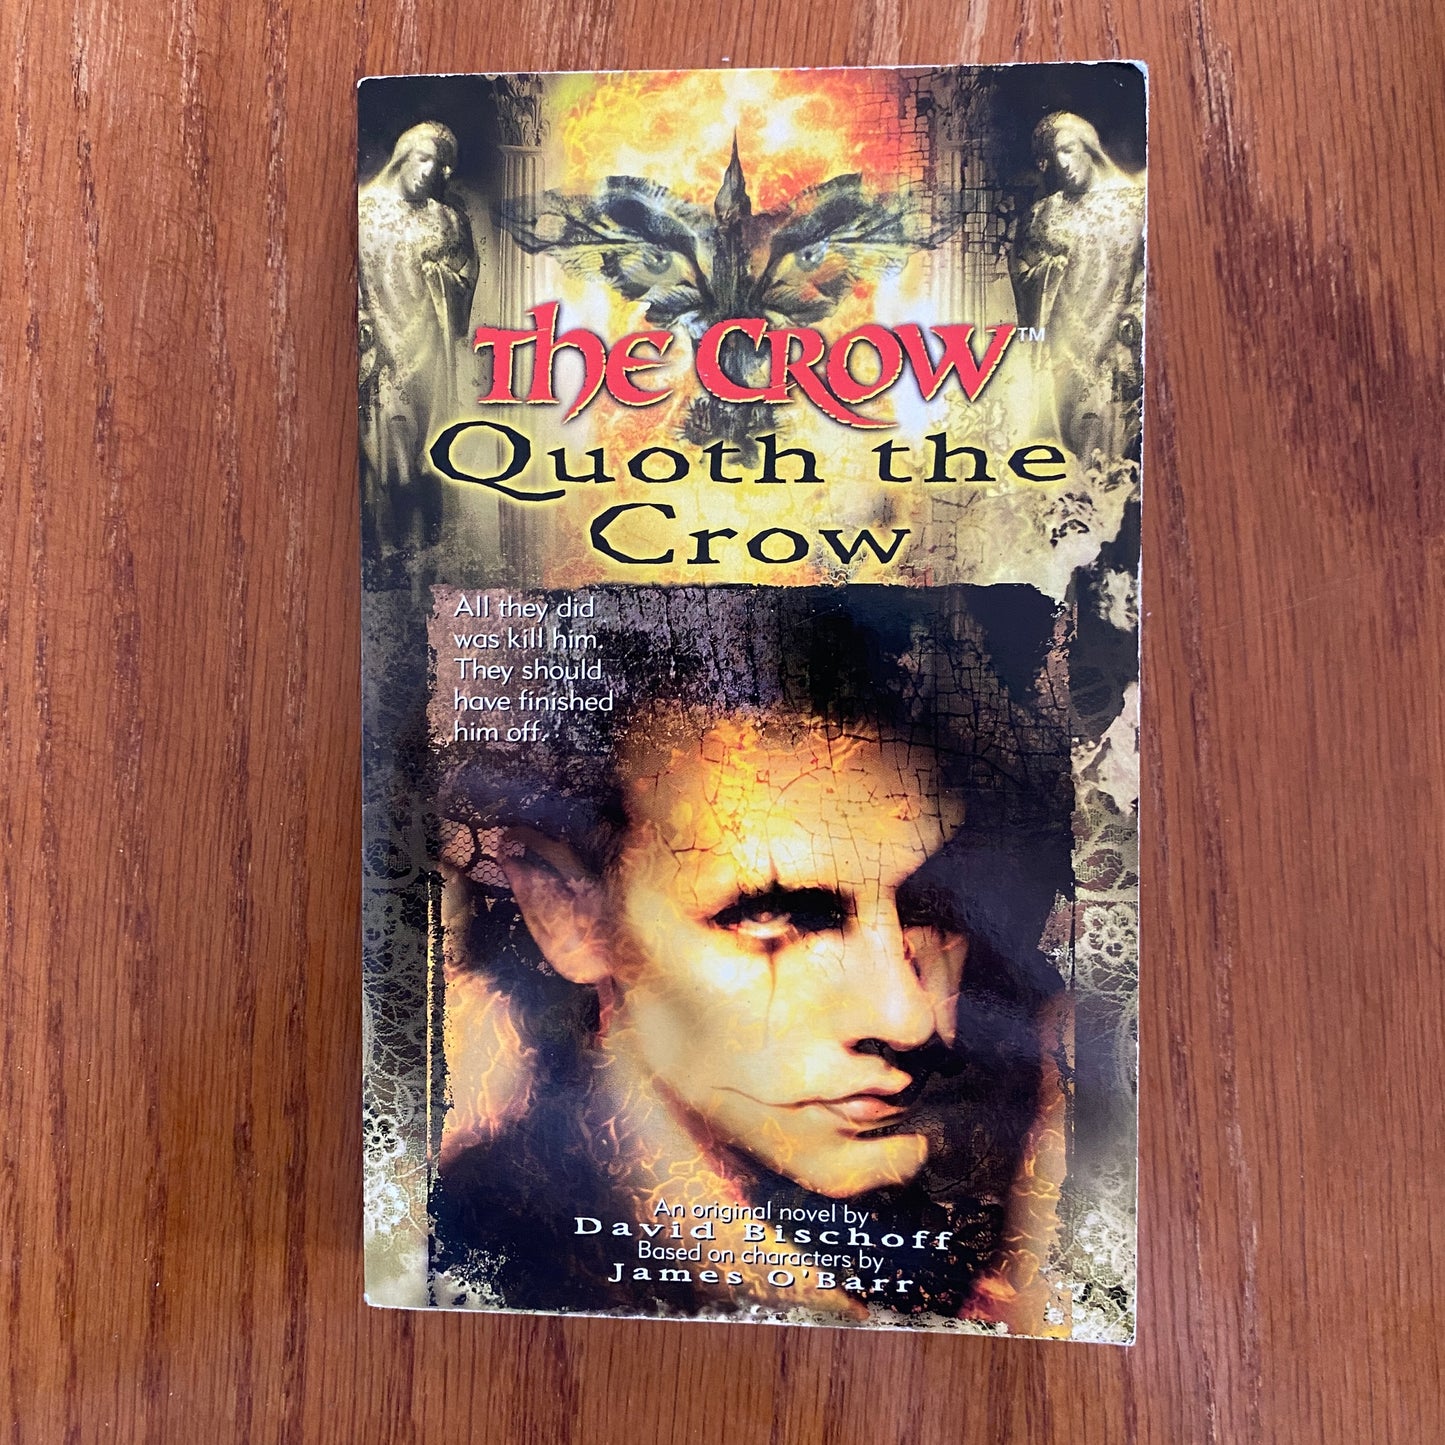 The Crow: Quoth The Crow - David Bischoff